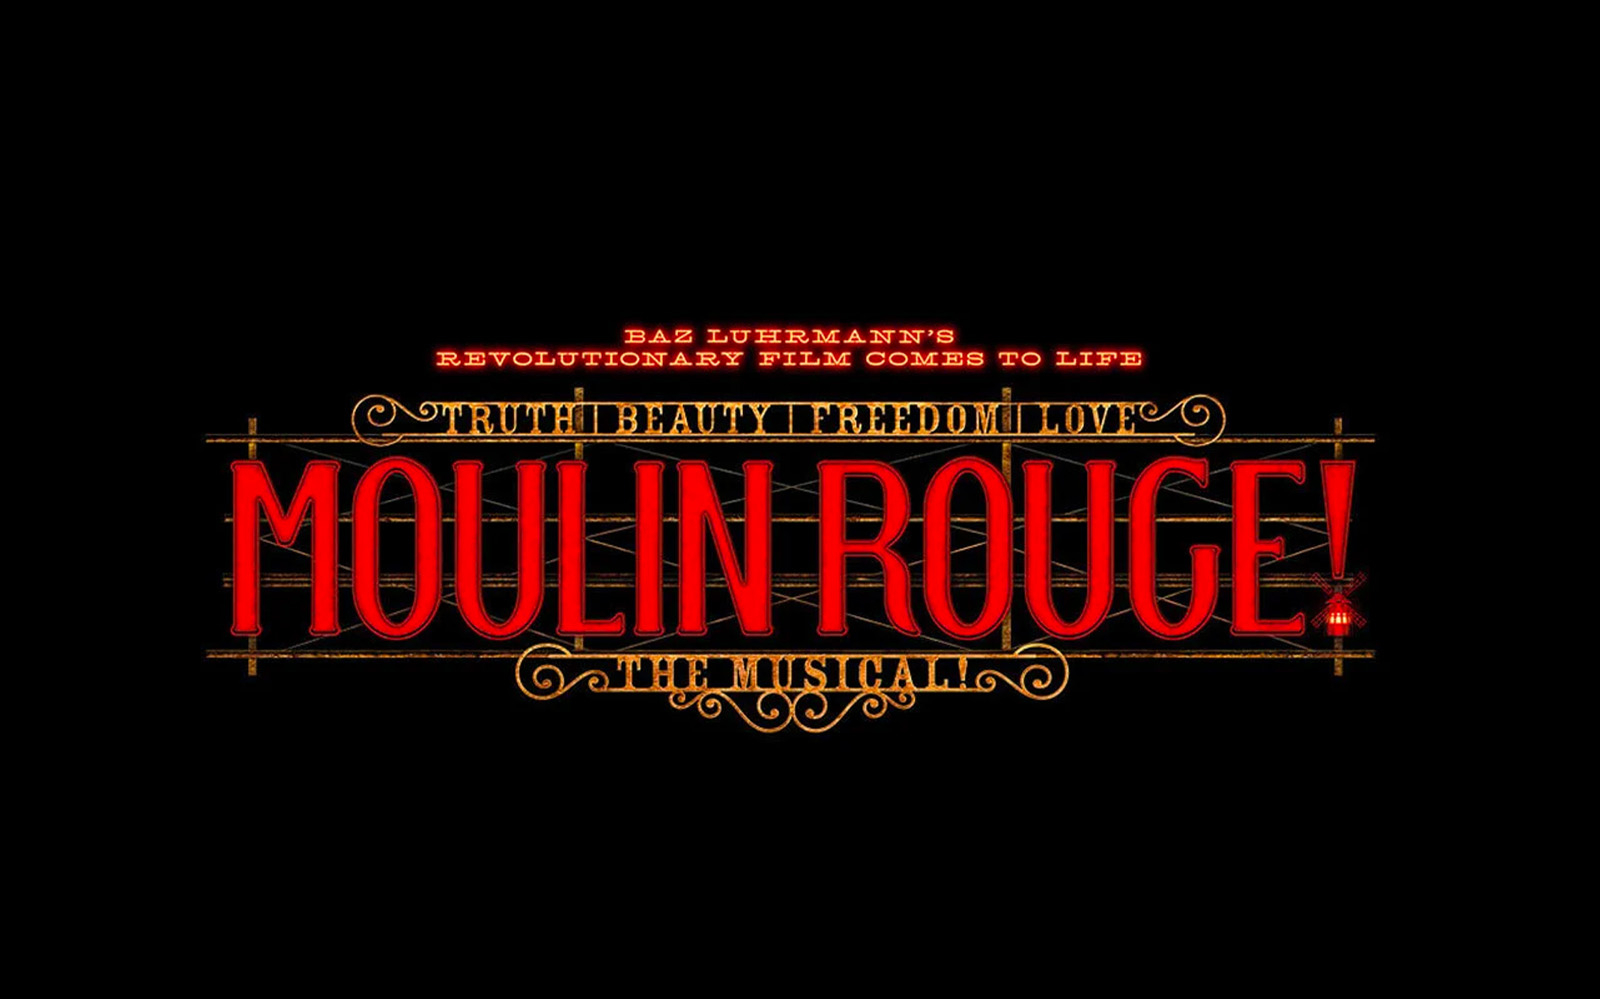 Image of Moulin Rouge! The Musical